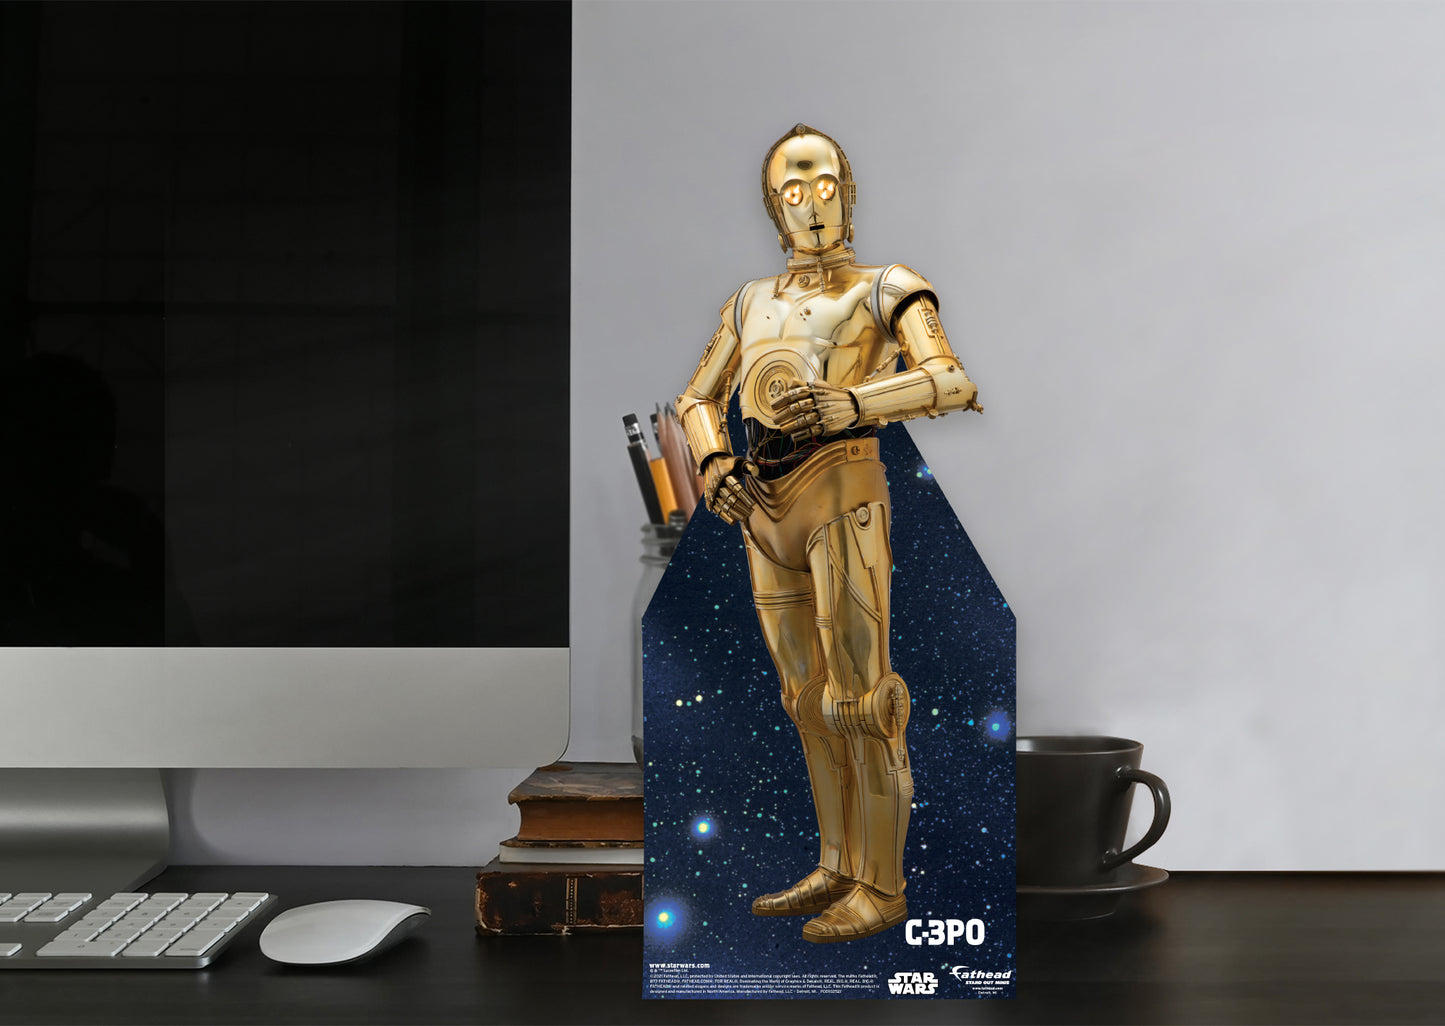 Sequel Trilogy: C-3PO Episode VIII Mini Cardstock Cutout - Officially Licensed Star Wars Stand Out